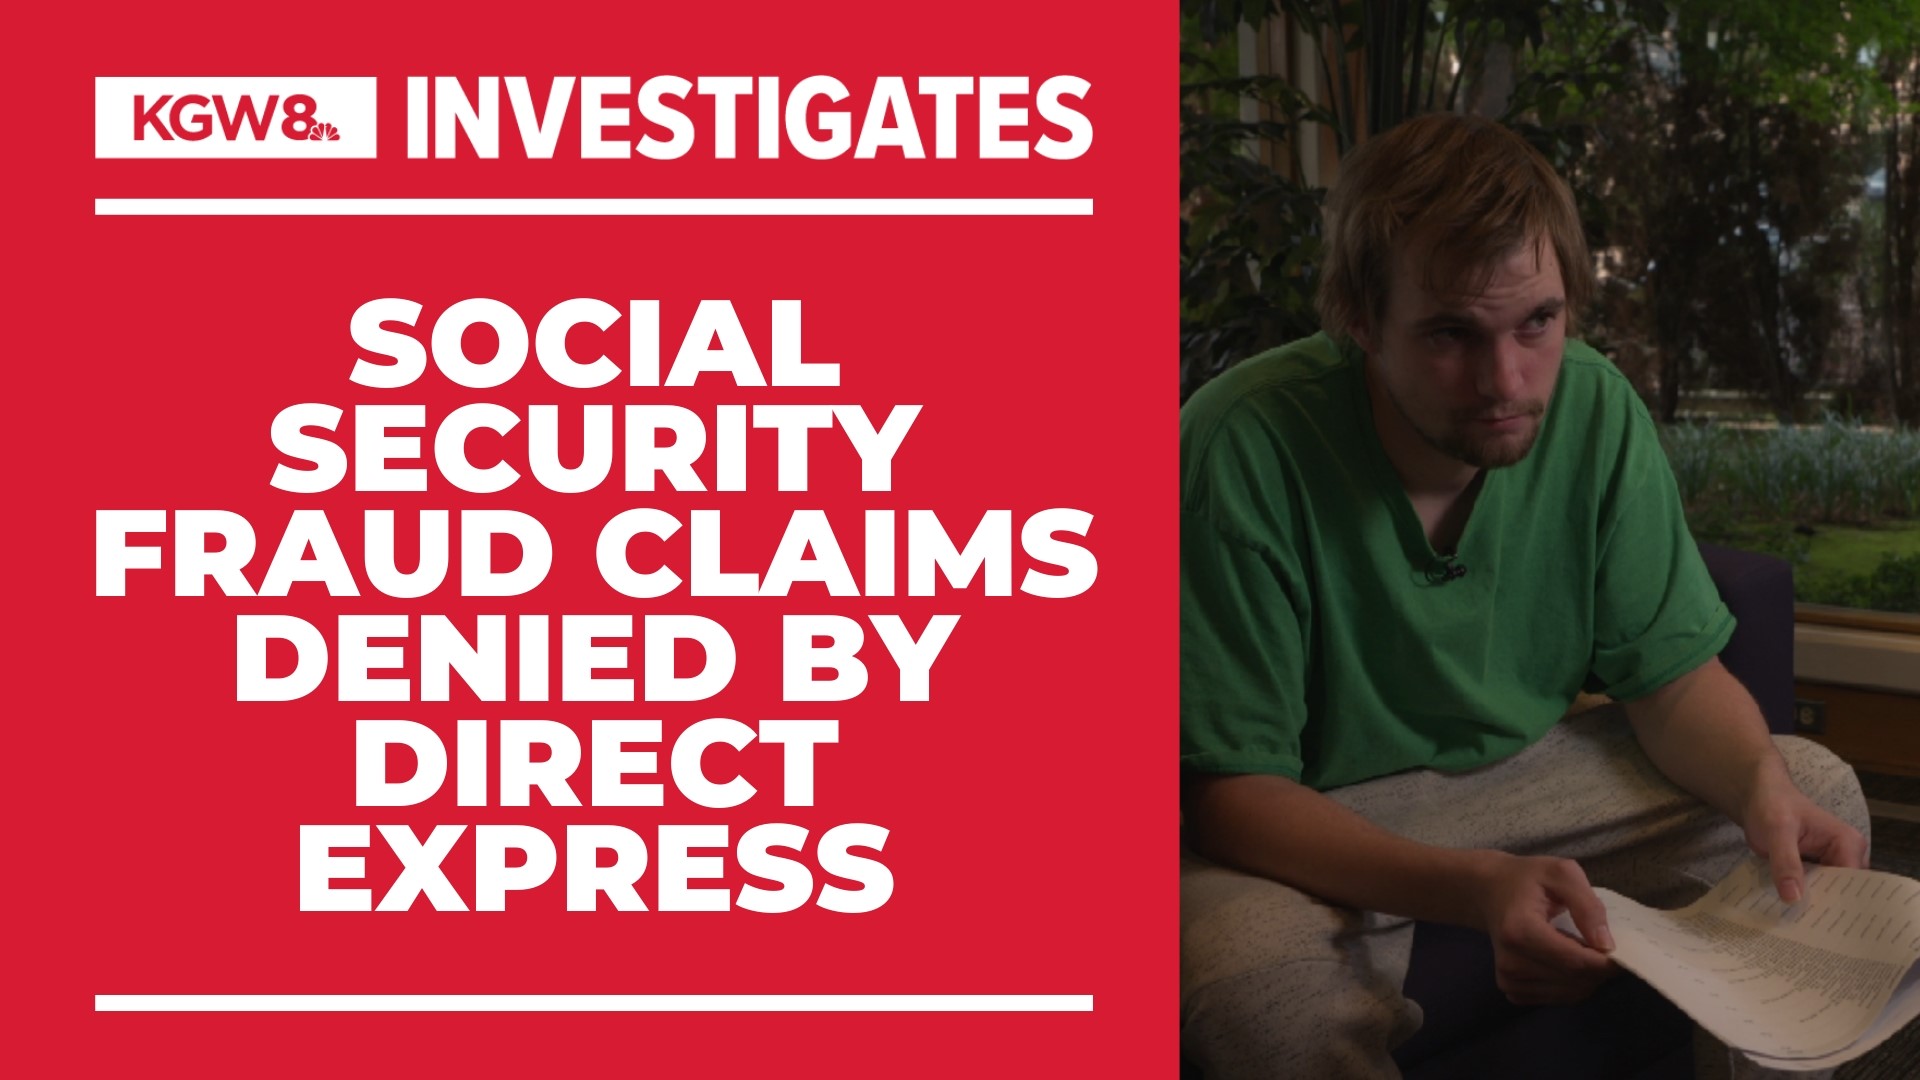 Seniors, veterans and people with disabilities complain Direct Express is denying refunds to social security benefit cardholders despite obvious signs of fraud.